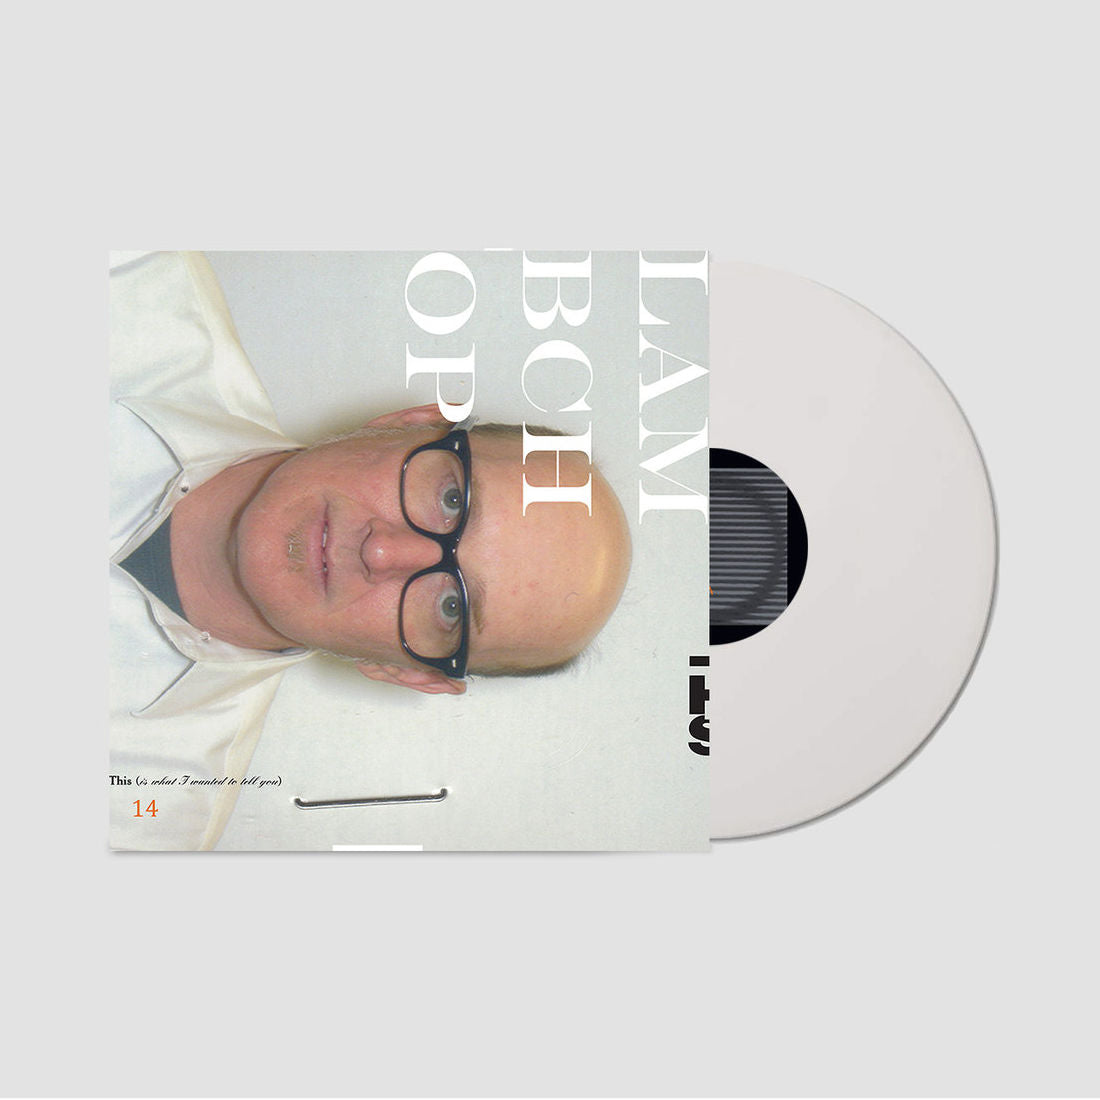 Lambchop - This (is what I wanted to tell you) (Limited Edition on 180g White Vinyl)